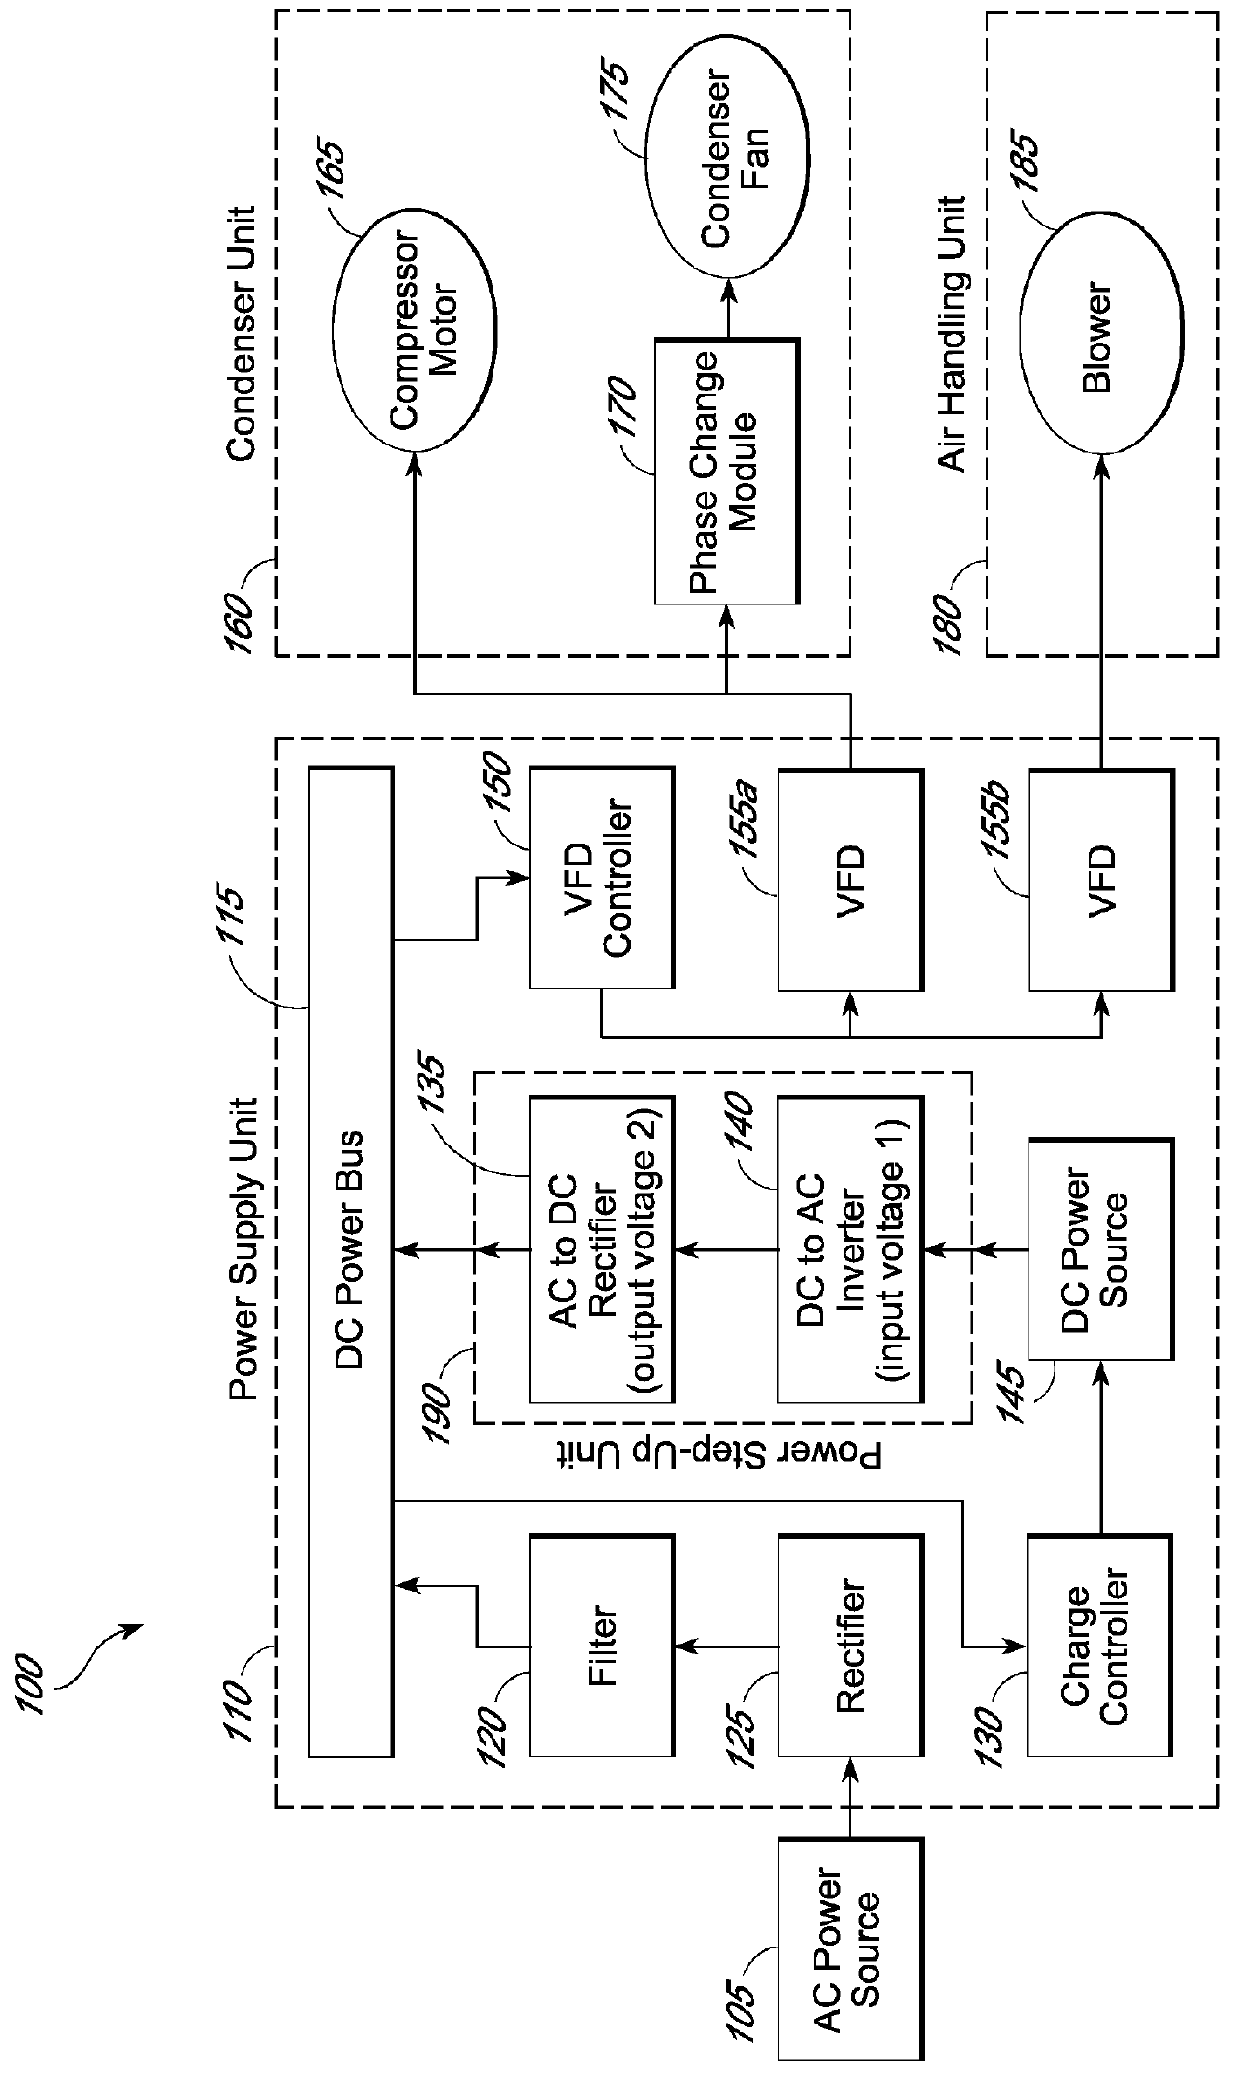 Hvac/r system with multiple power sources and time-based selection logic